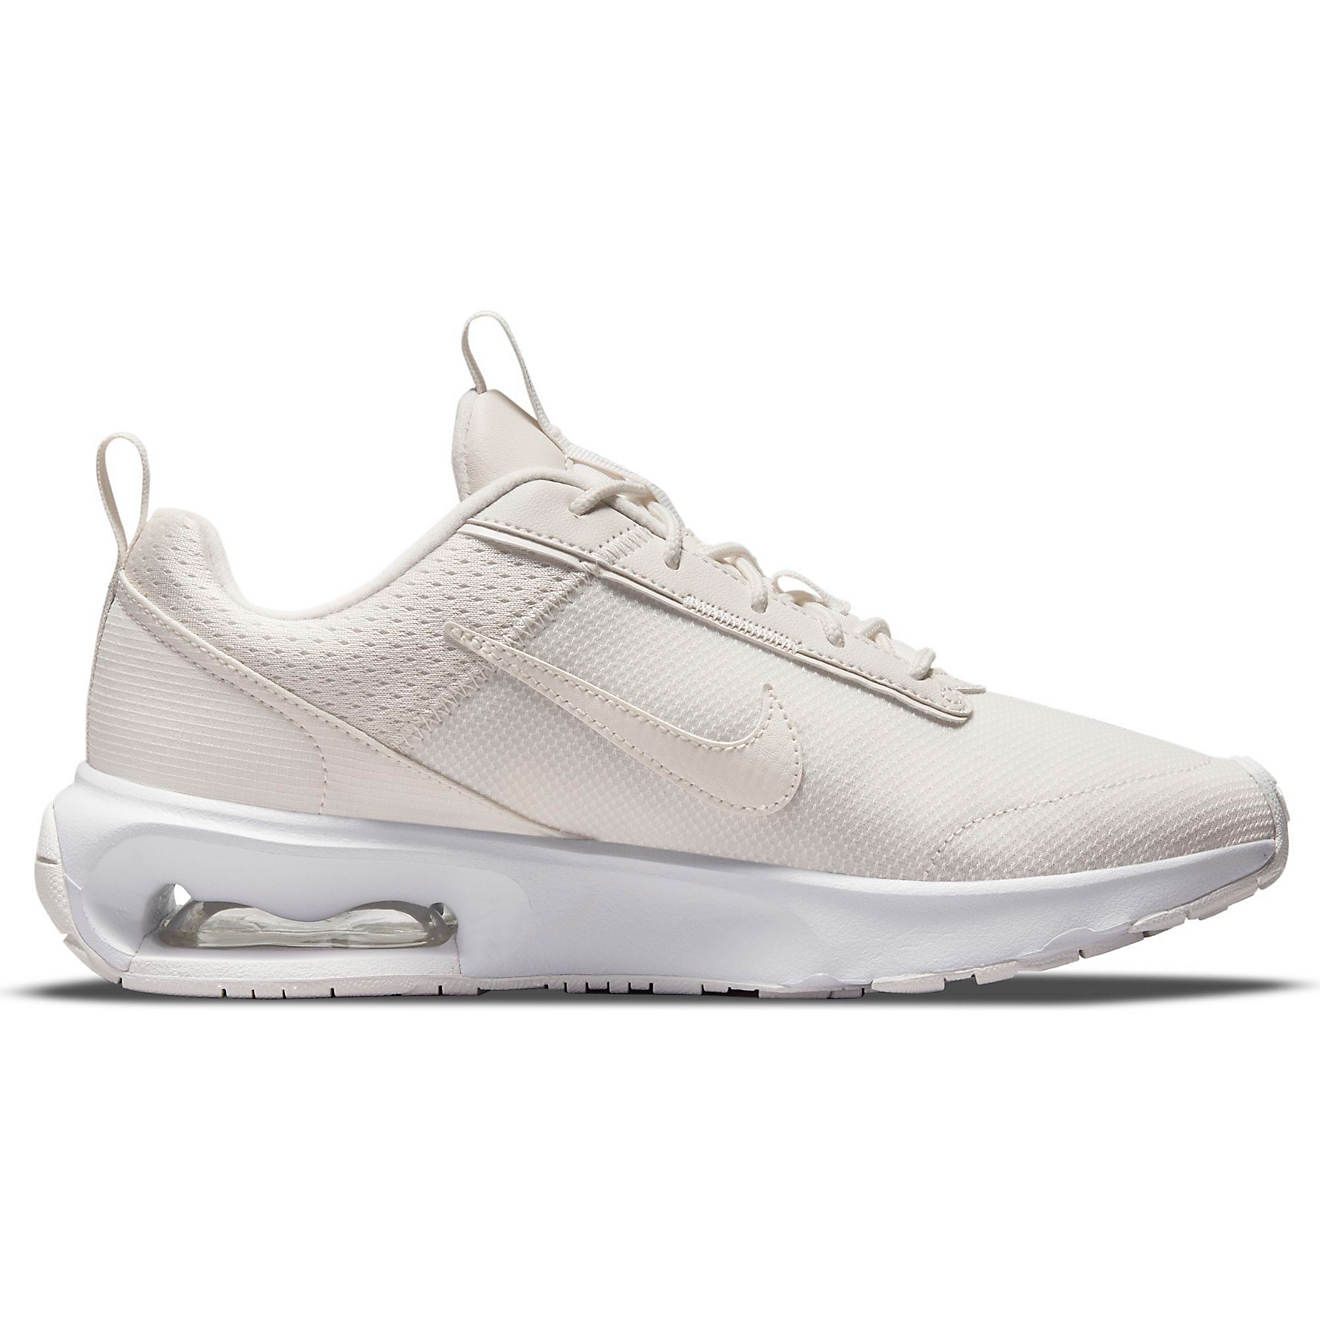 Nike Women's Air Max Interlock Shoes | Academy | Academy Sports + Outdoors